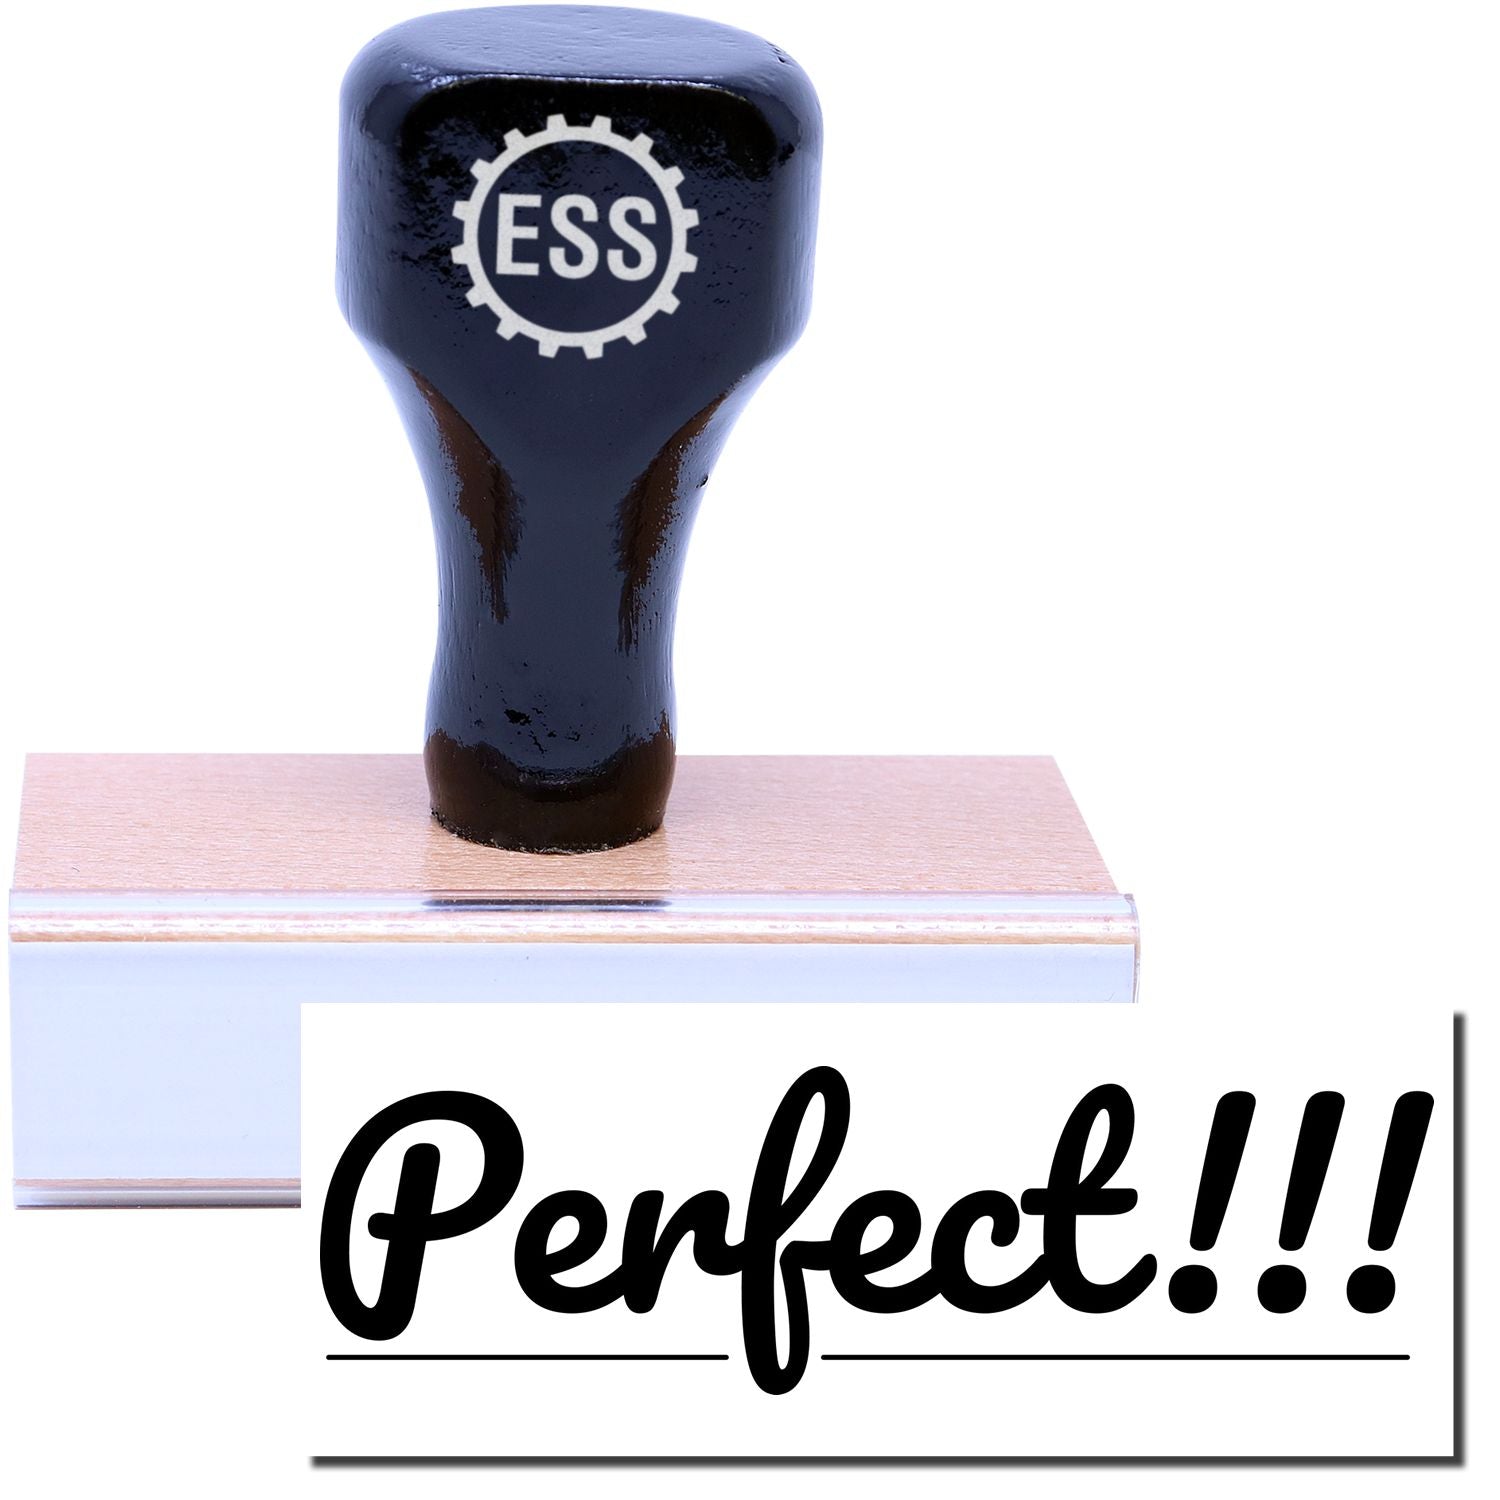 A stock office rubber stamp with a stamped image showing how the text "Perfect!!!" in striking font with multiple exclamation points is displayed after stamping.